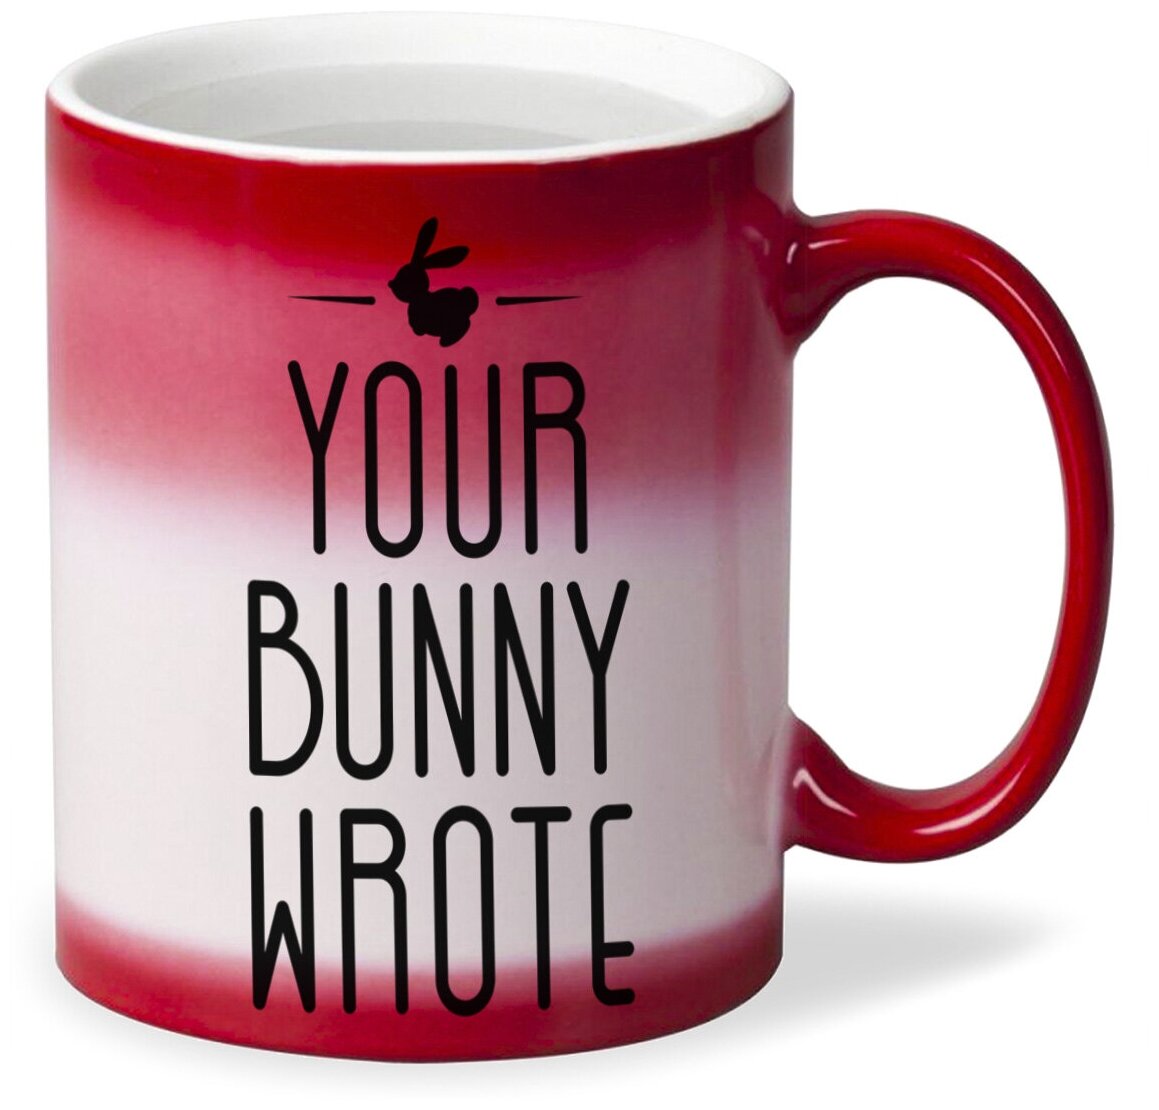 Your bunny wrote steam фото 72